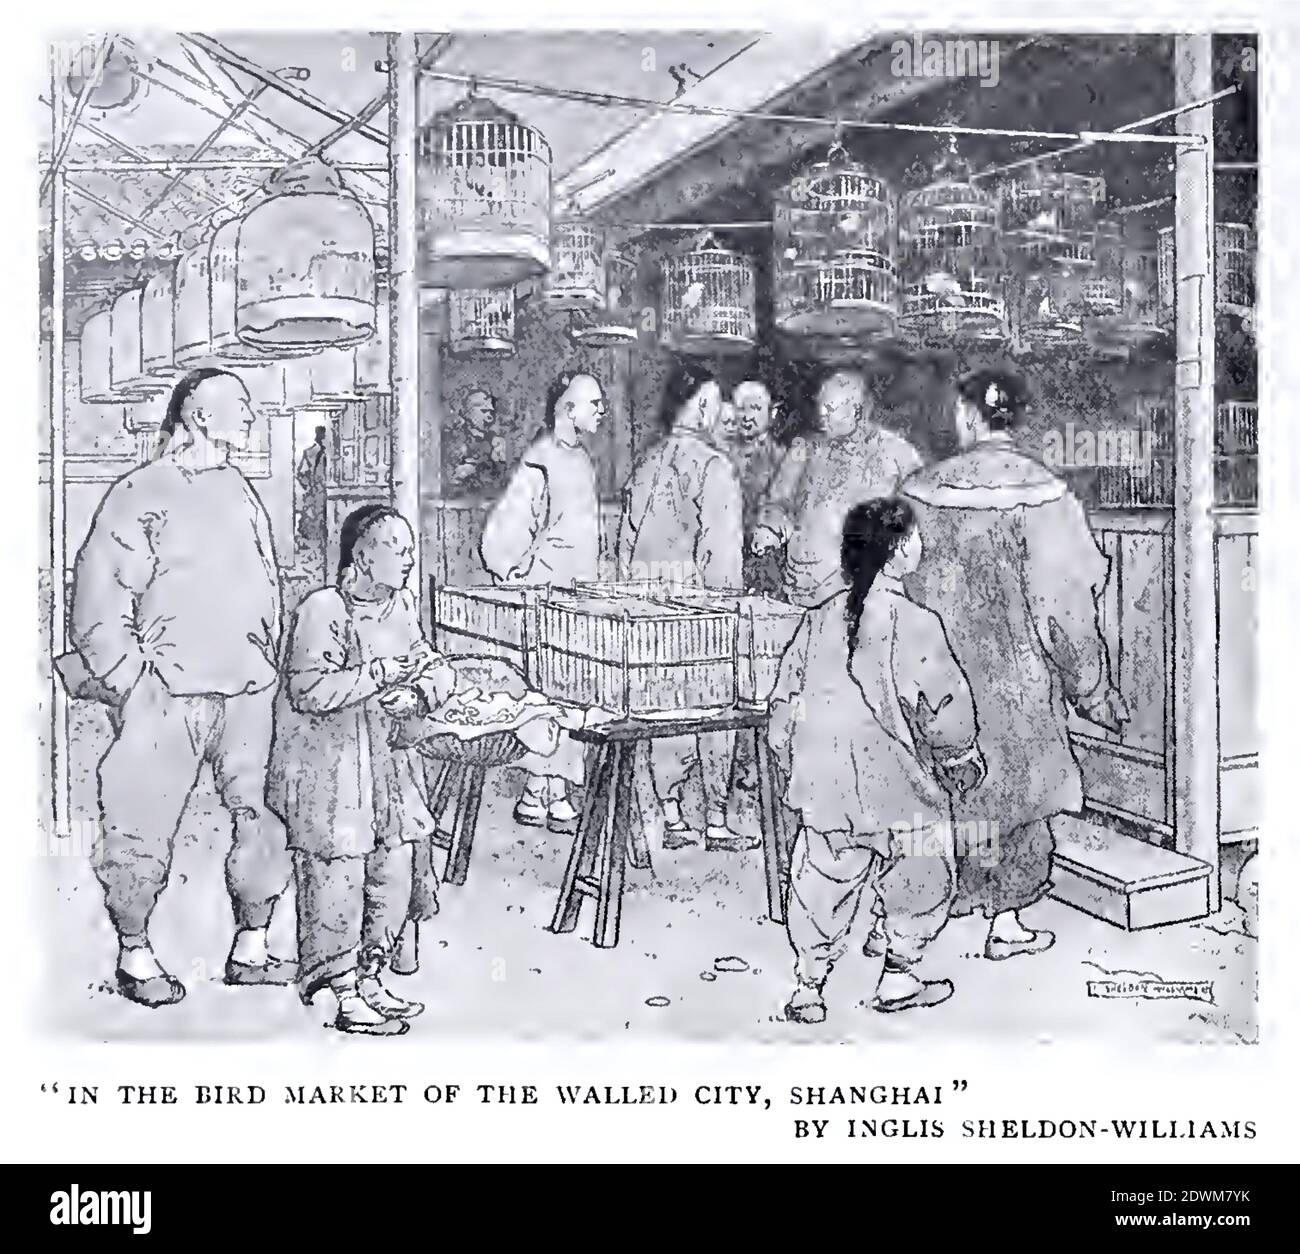 Vintage antique illustration called In the Bird Market of the Walled City, Shanghai by anglo-canadiana Inglis Sheldon Williams. Stock Photo